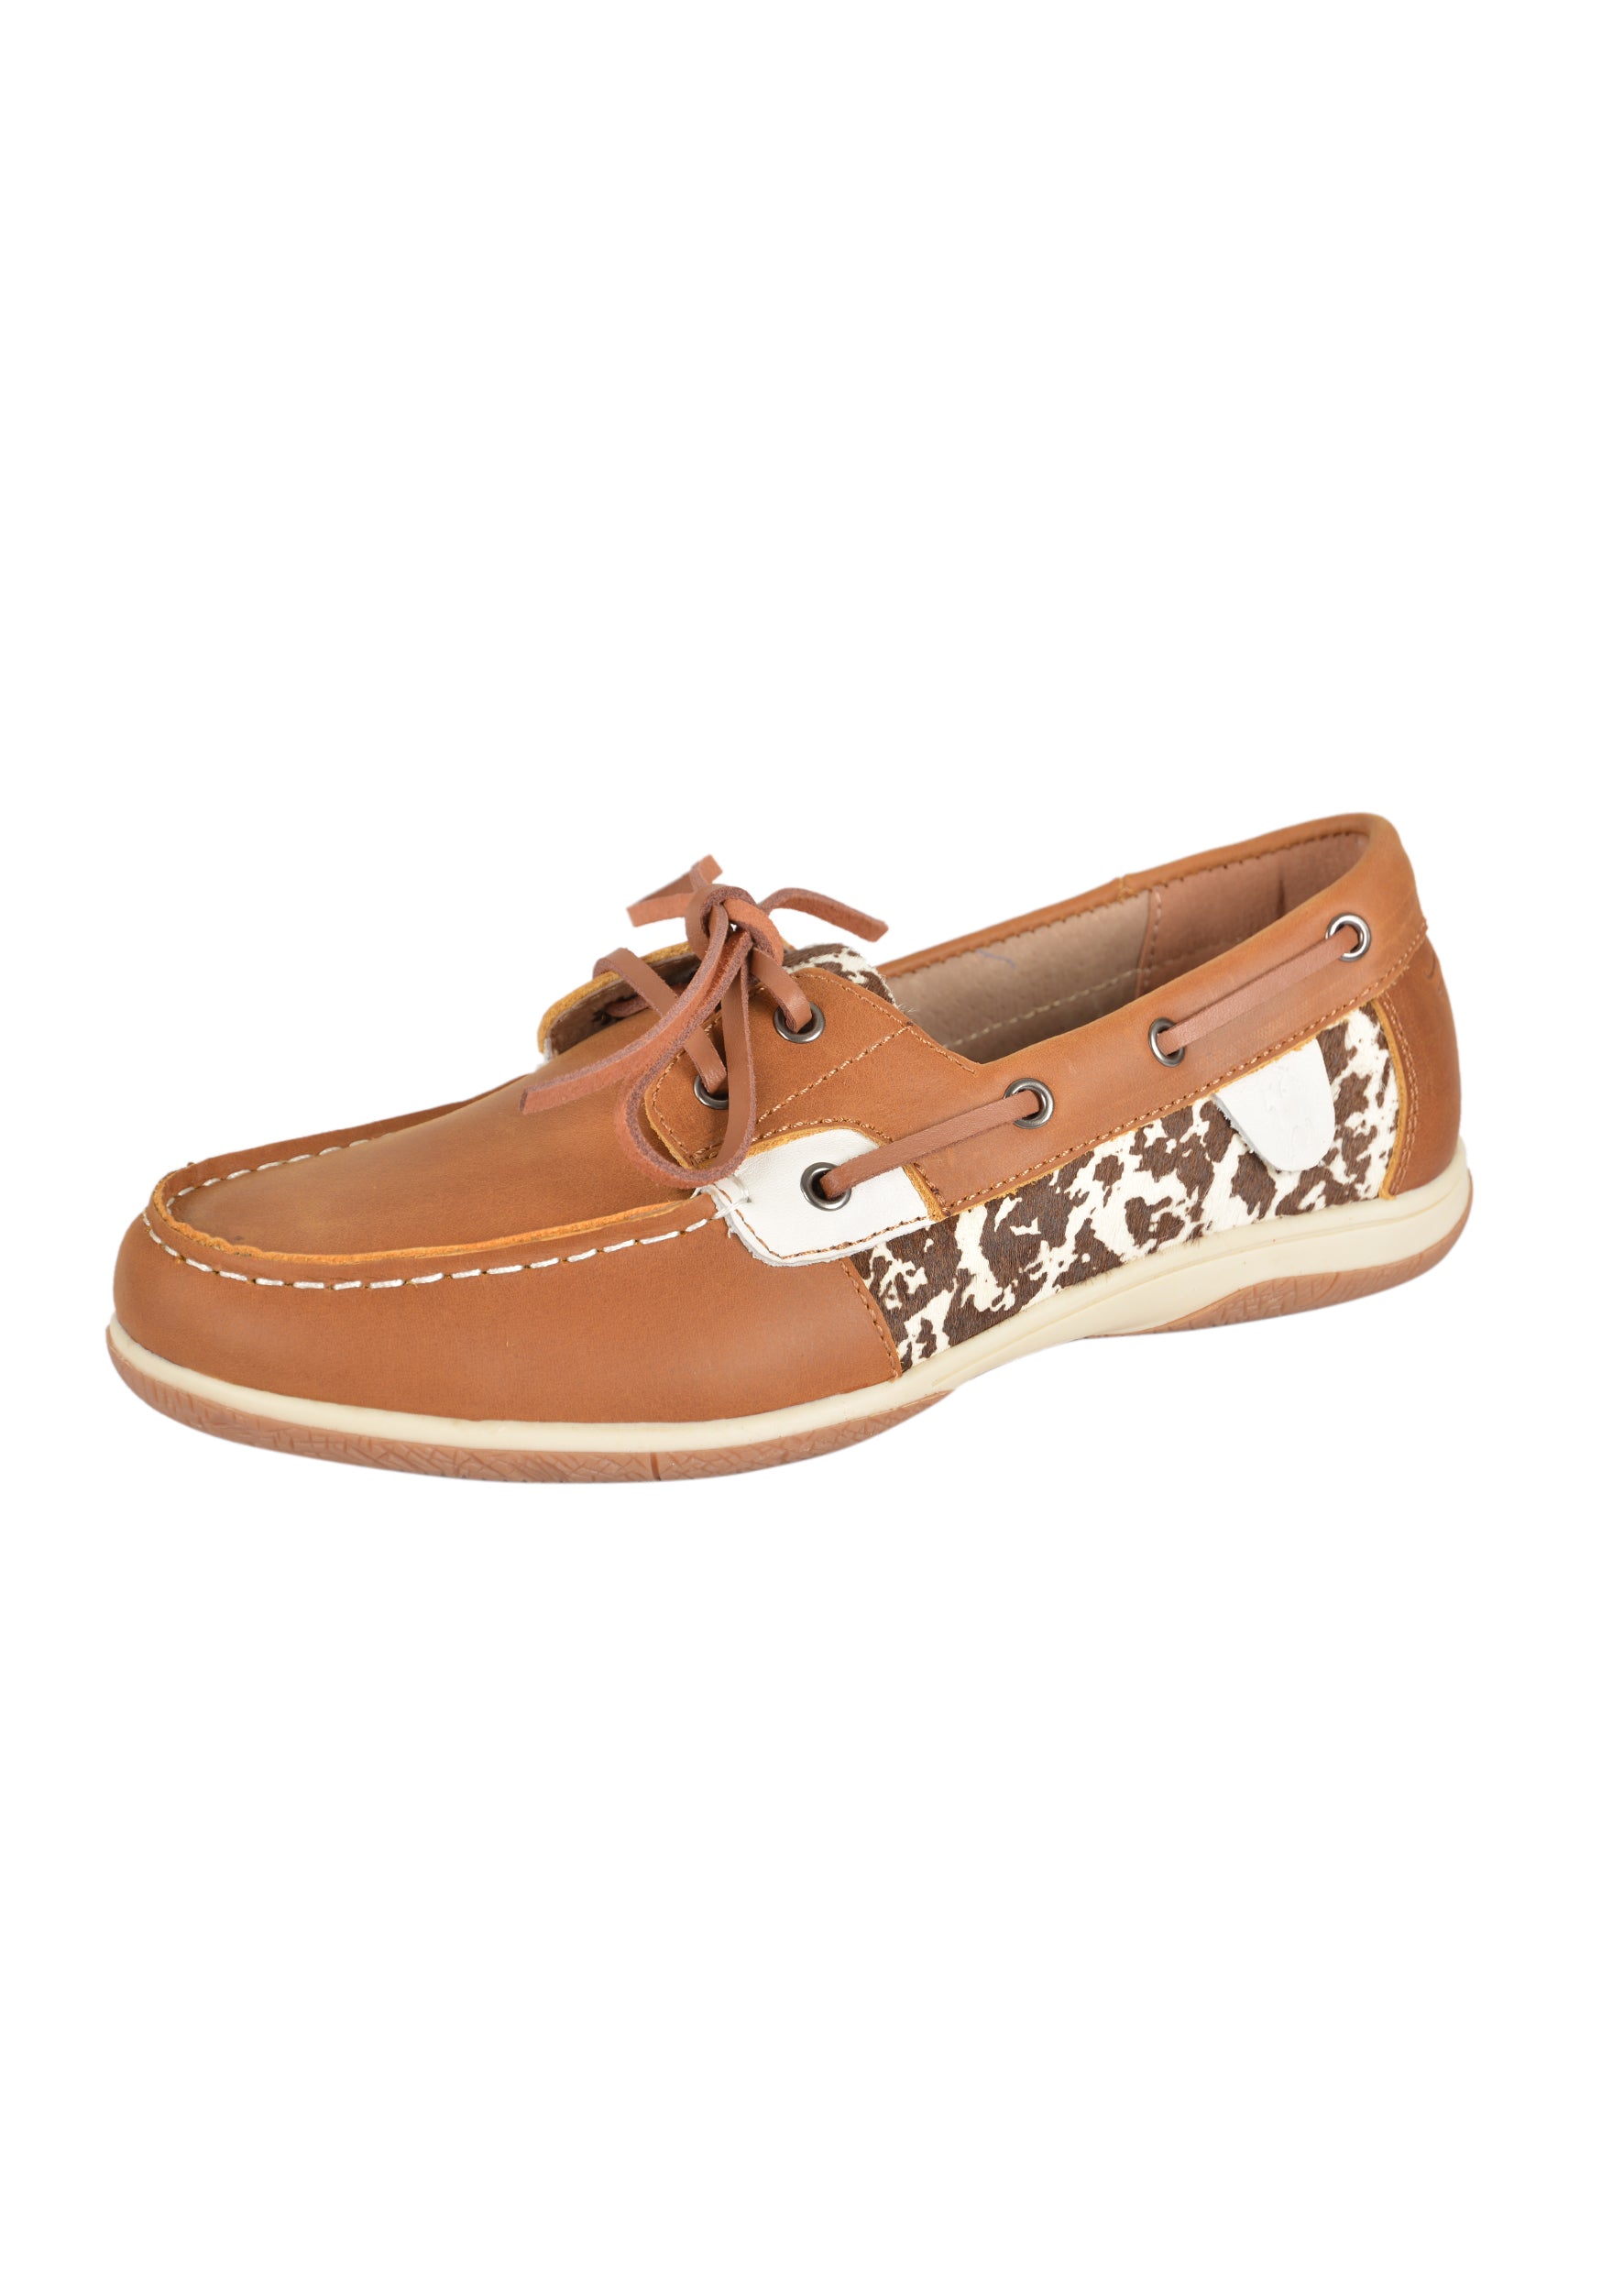 Thomas Cook Wmns Escapade Casual Lace Up Shoe - CLEARANCE